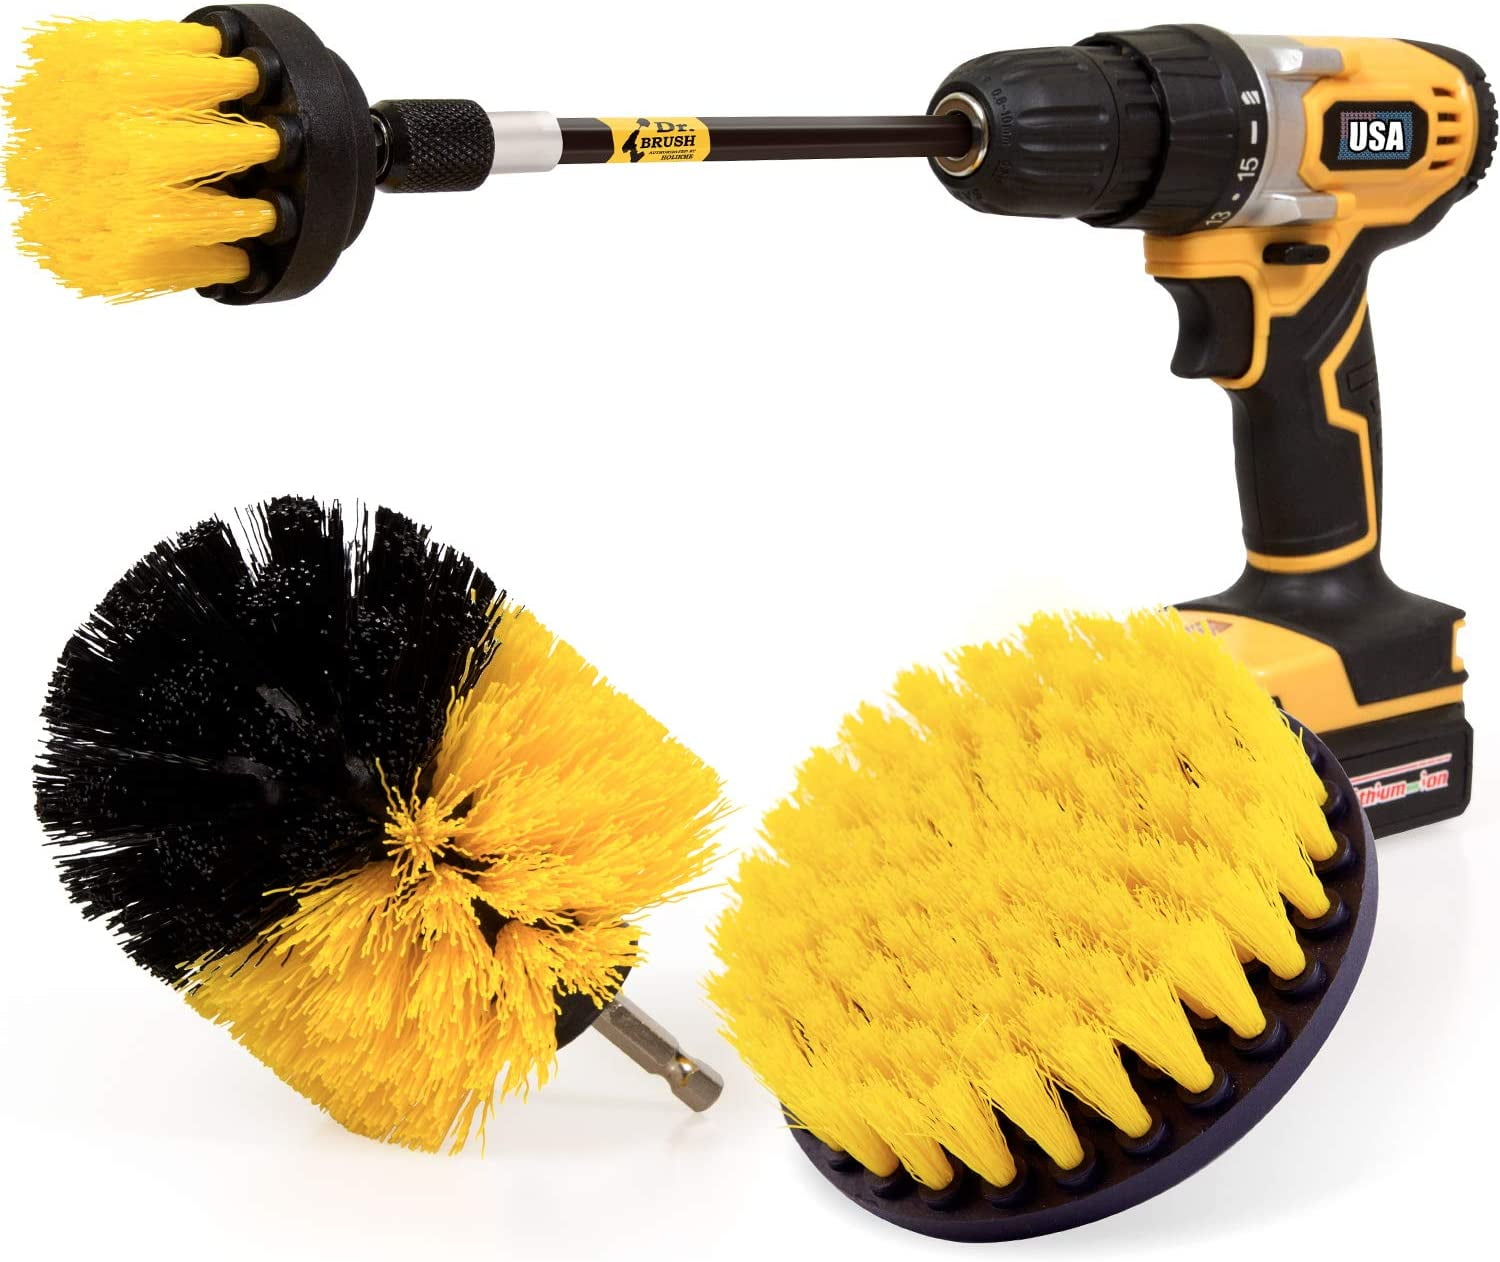 3-22X Drill Brush Power Scrubber Attachments For Wall Carpet Tile Grout  Cleaning